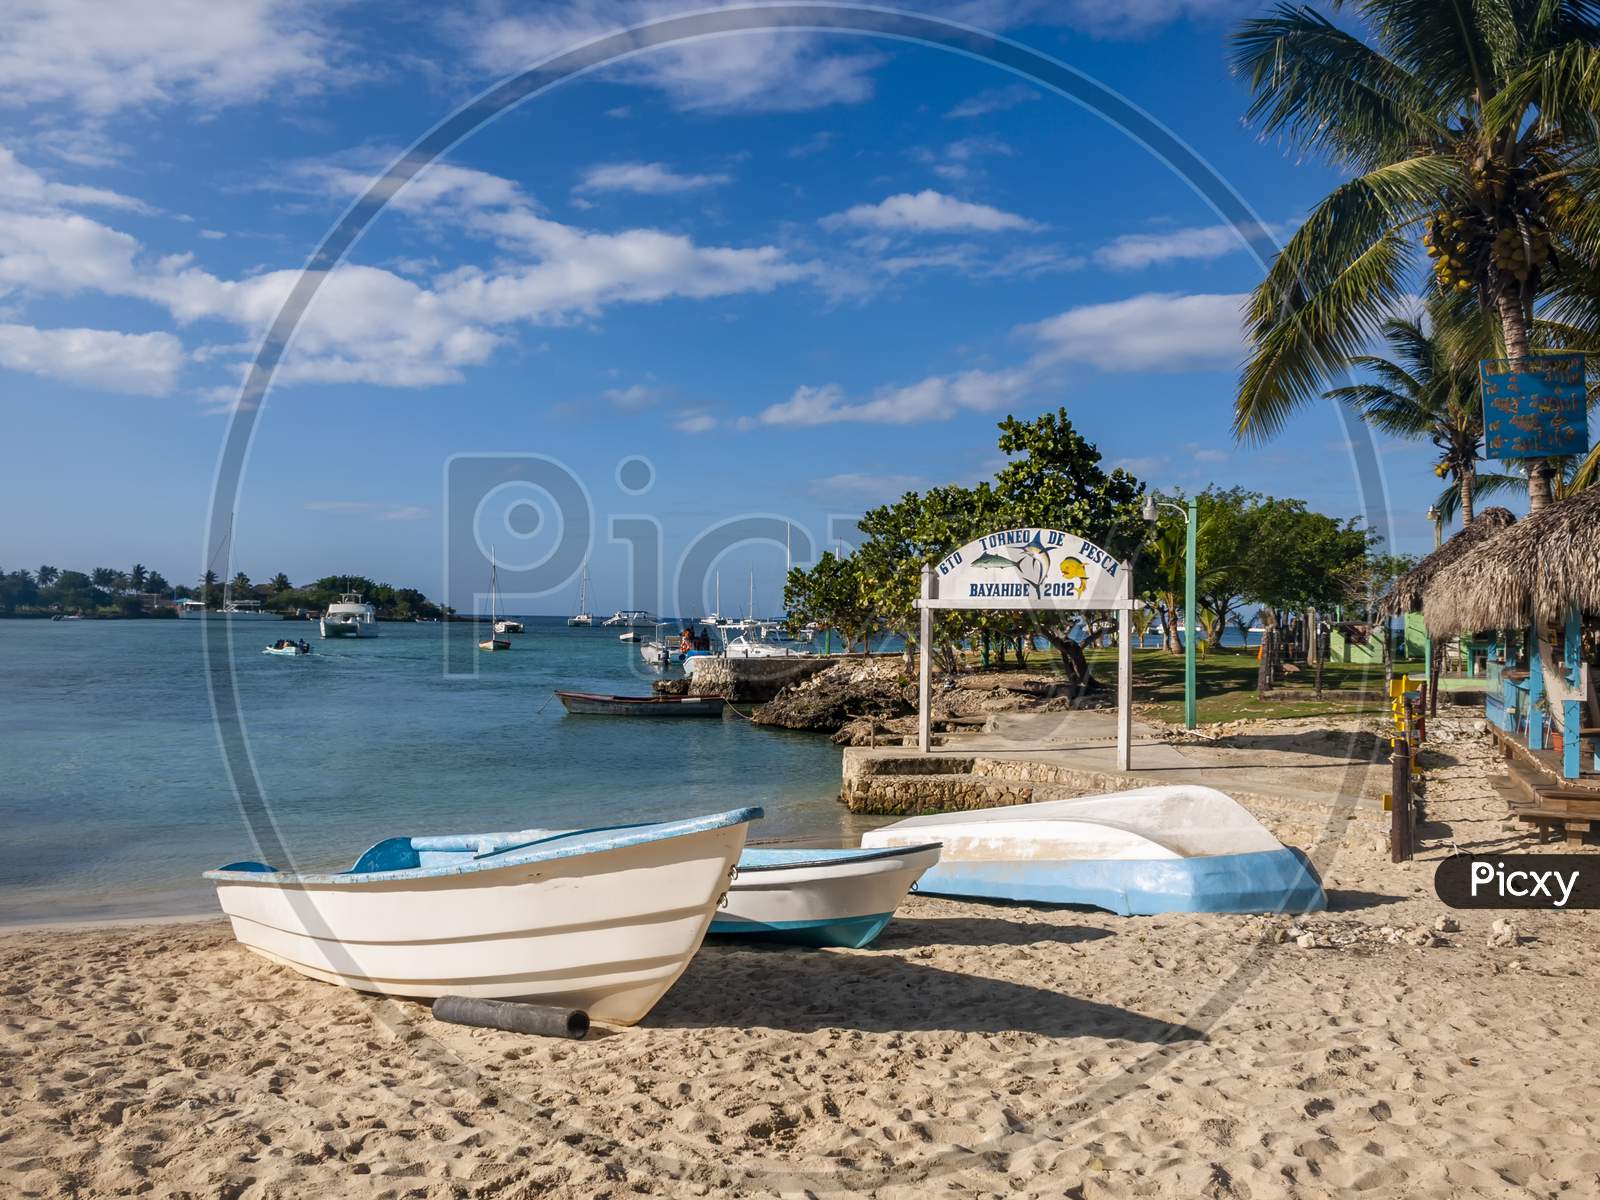 Boats at rest on a Caribbean beach.